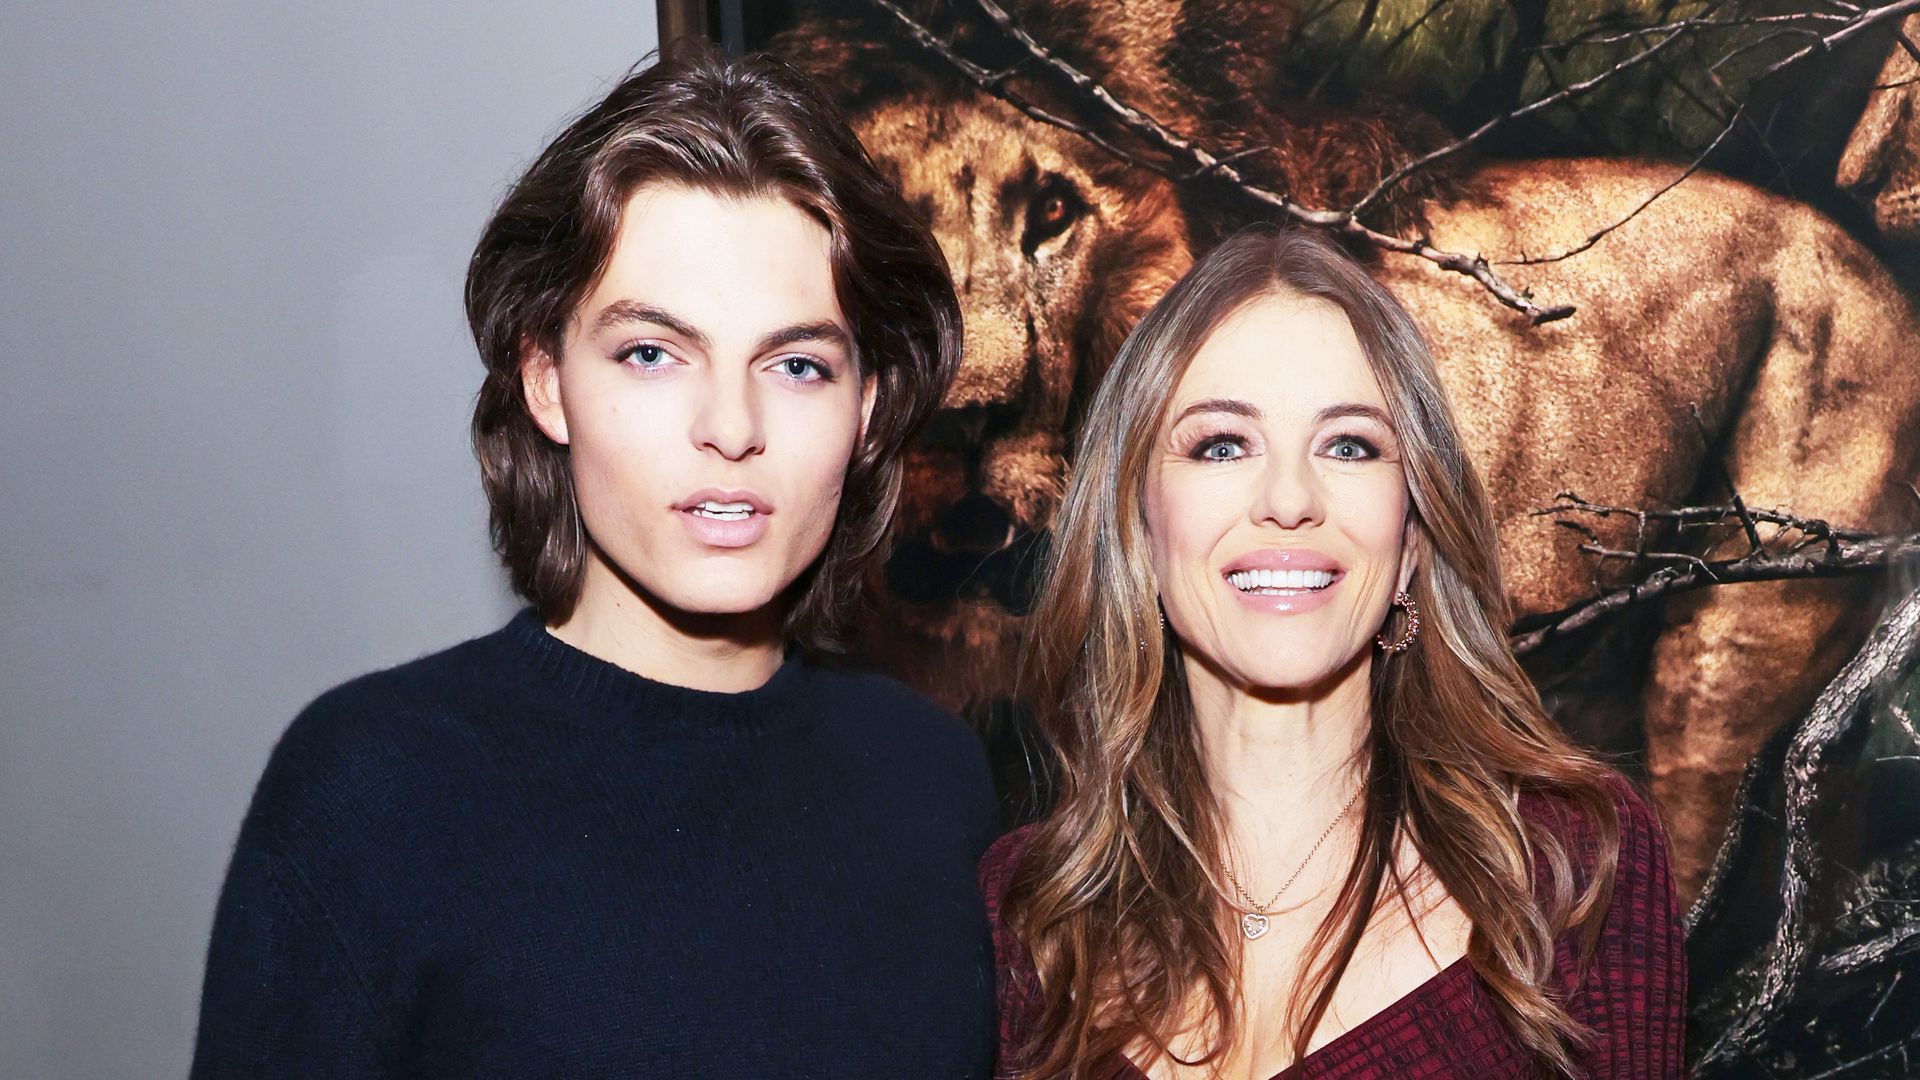 Elizabeth Hurley and her lookalike son Damian reveal they share each other's clothes